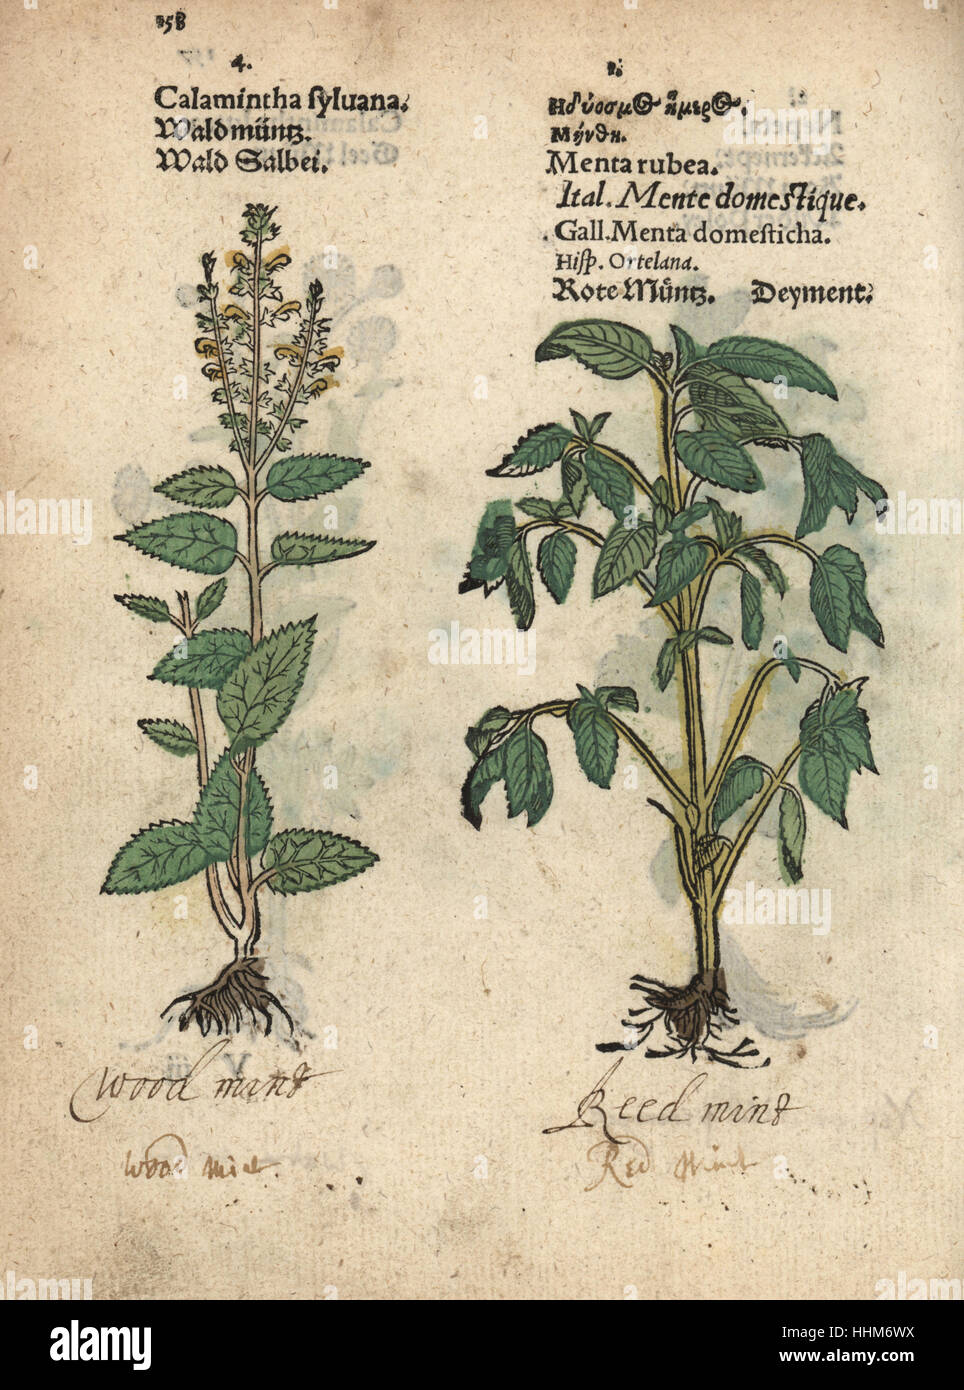 Wood sage, Teucrium scorodonia, and red mint species, Mentha rubra. Handcoloured woodblock engraving of a botanical illustration from Adam Lonicer's Krauterbuch, or Herbal, Frankfurt, 1557. This from a 17th century pirate edition or atlas of illustrations only, with captions in Latin, Greek, French, Italian, German, and in English manuscript. Stock Photo